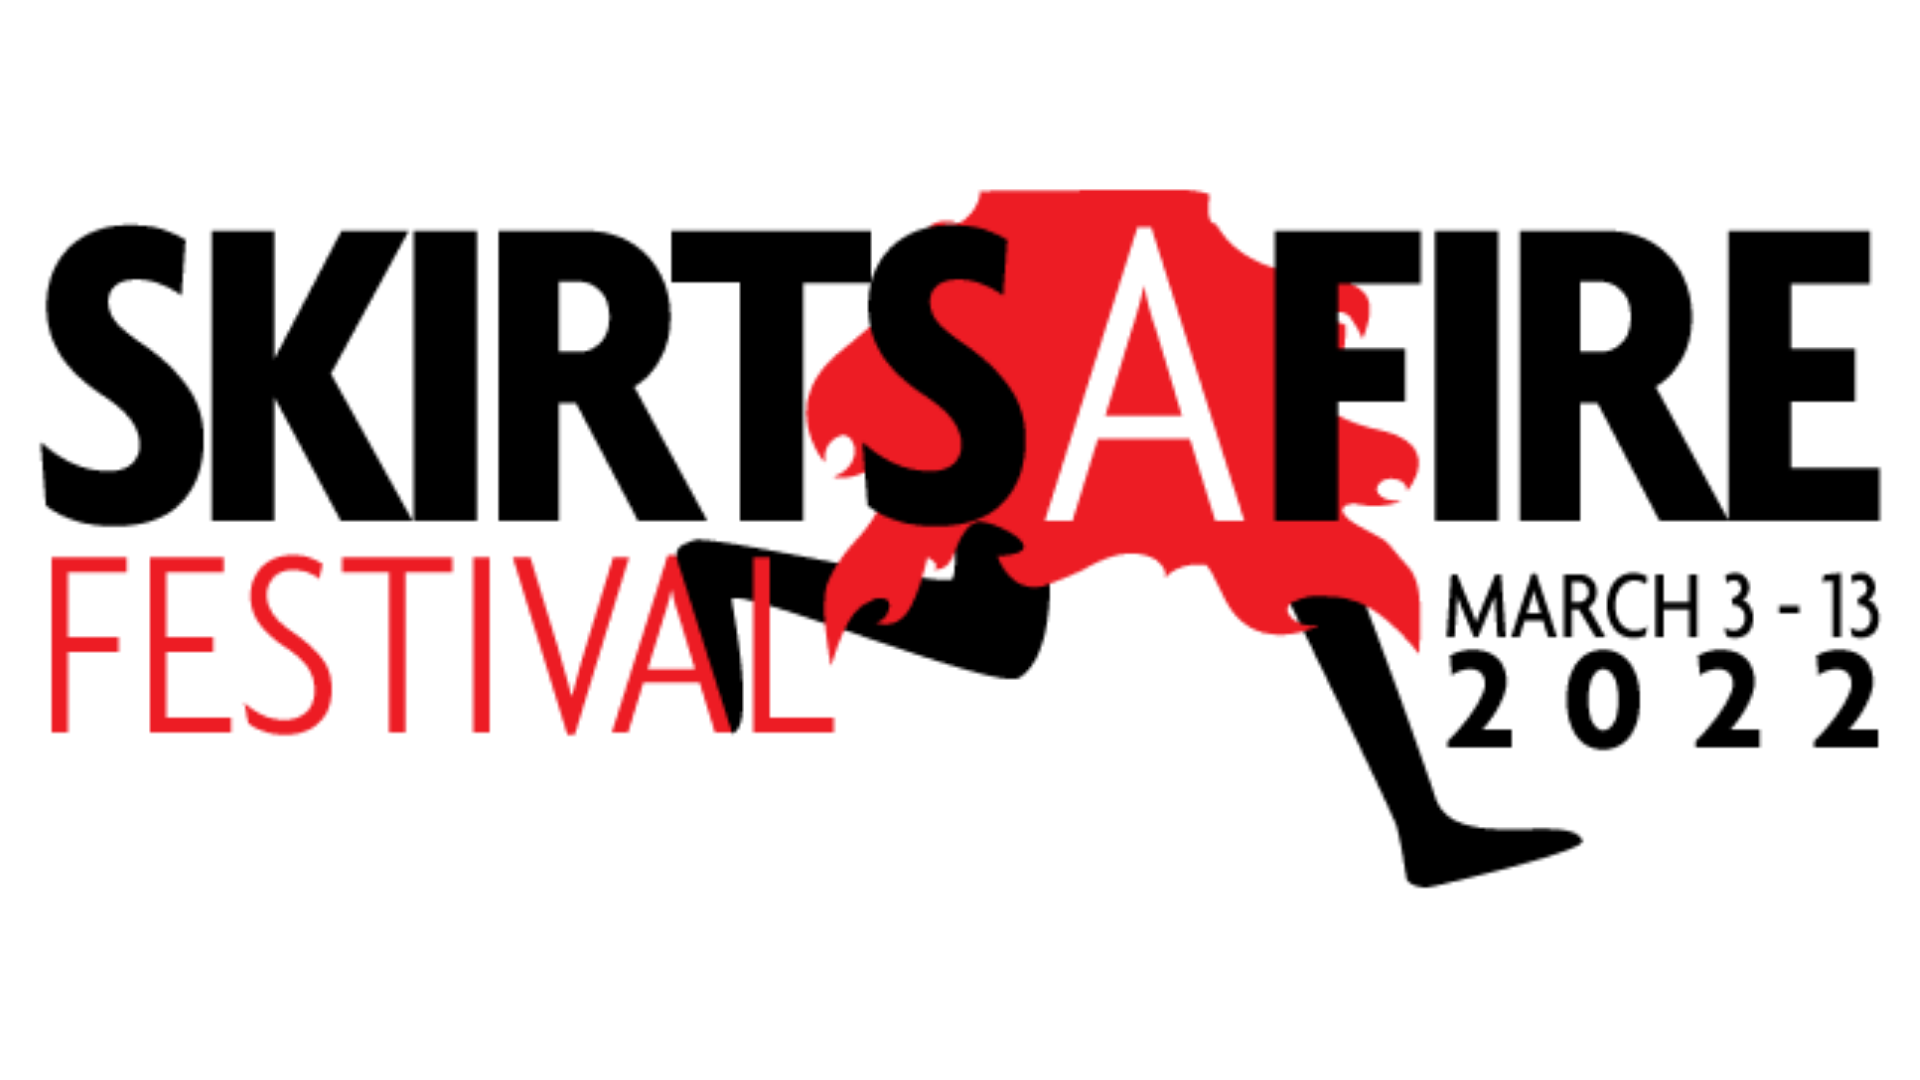 The SkirtsAfire festival logo, with a woman 's legs in a red skirt that looks like flames licking at the festival name